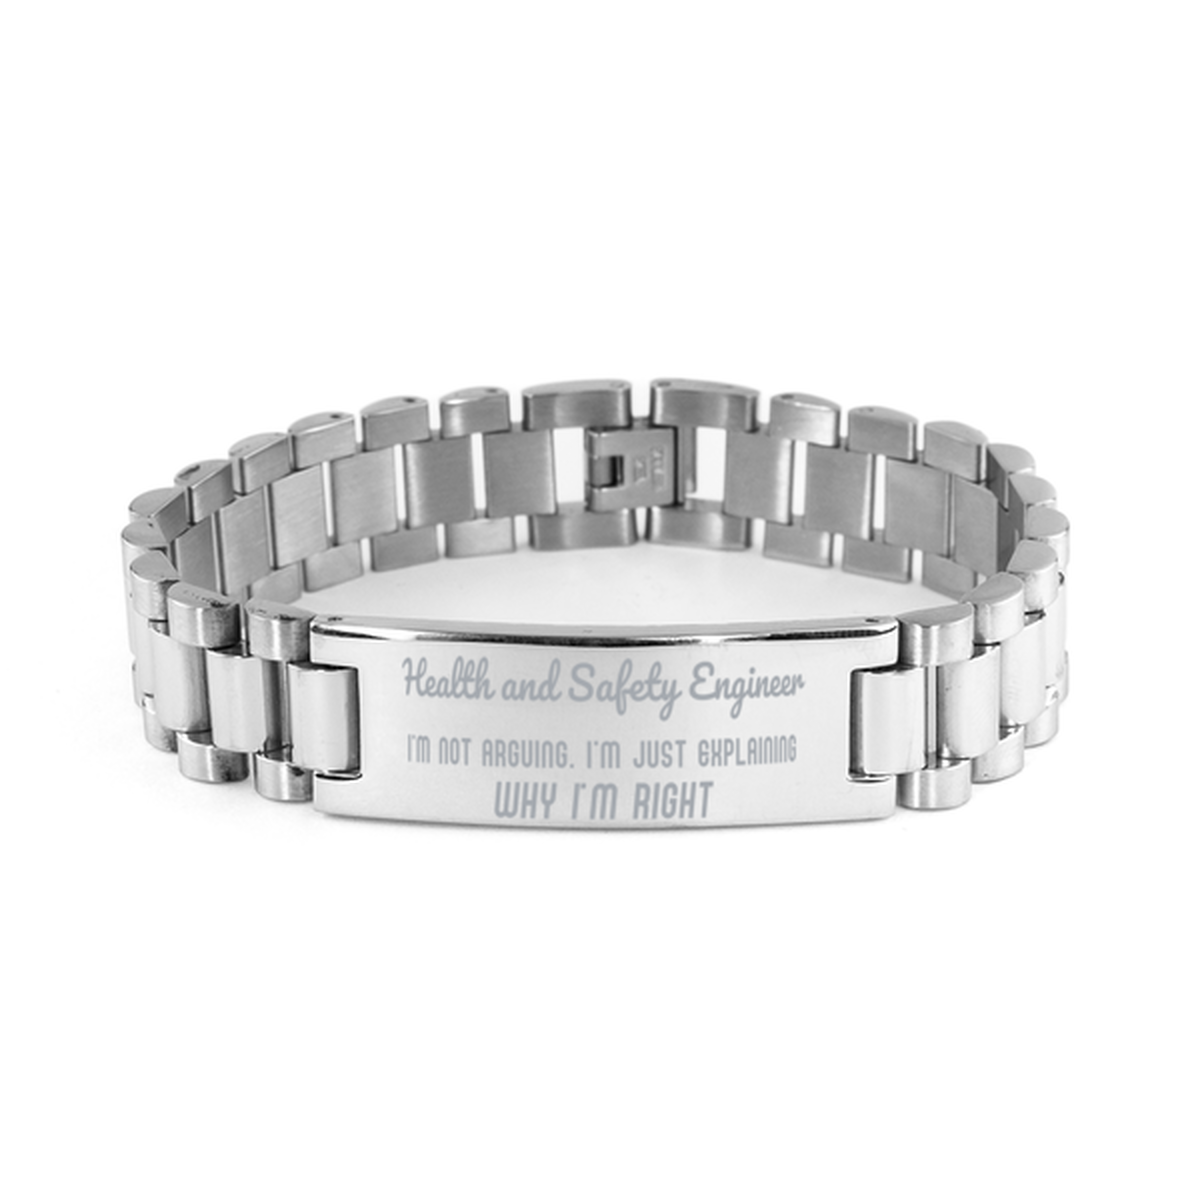 Health and Safety Engineer I'm not Arguing. I'm Just Explaining Why I'm RIGHT Ladder Stainless Steel Bracelet, Graduation Birthday Christmas Health and Safety Engineer Gifts For Health and Safety Engineer Funny Saying Quote Present for Men Women Coworker